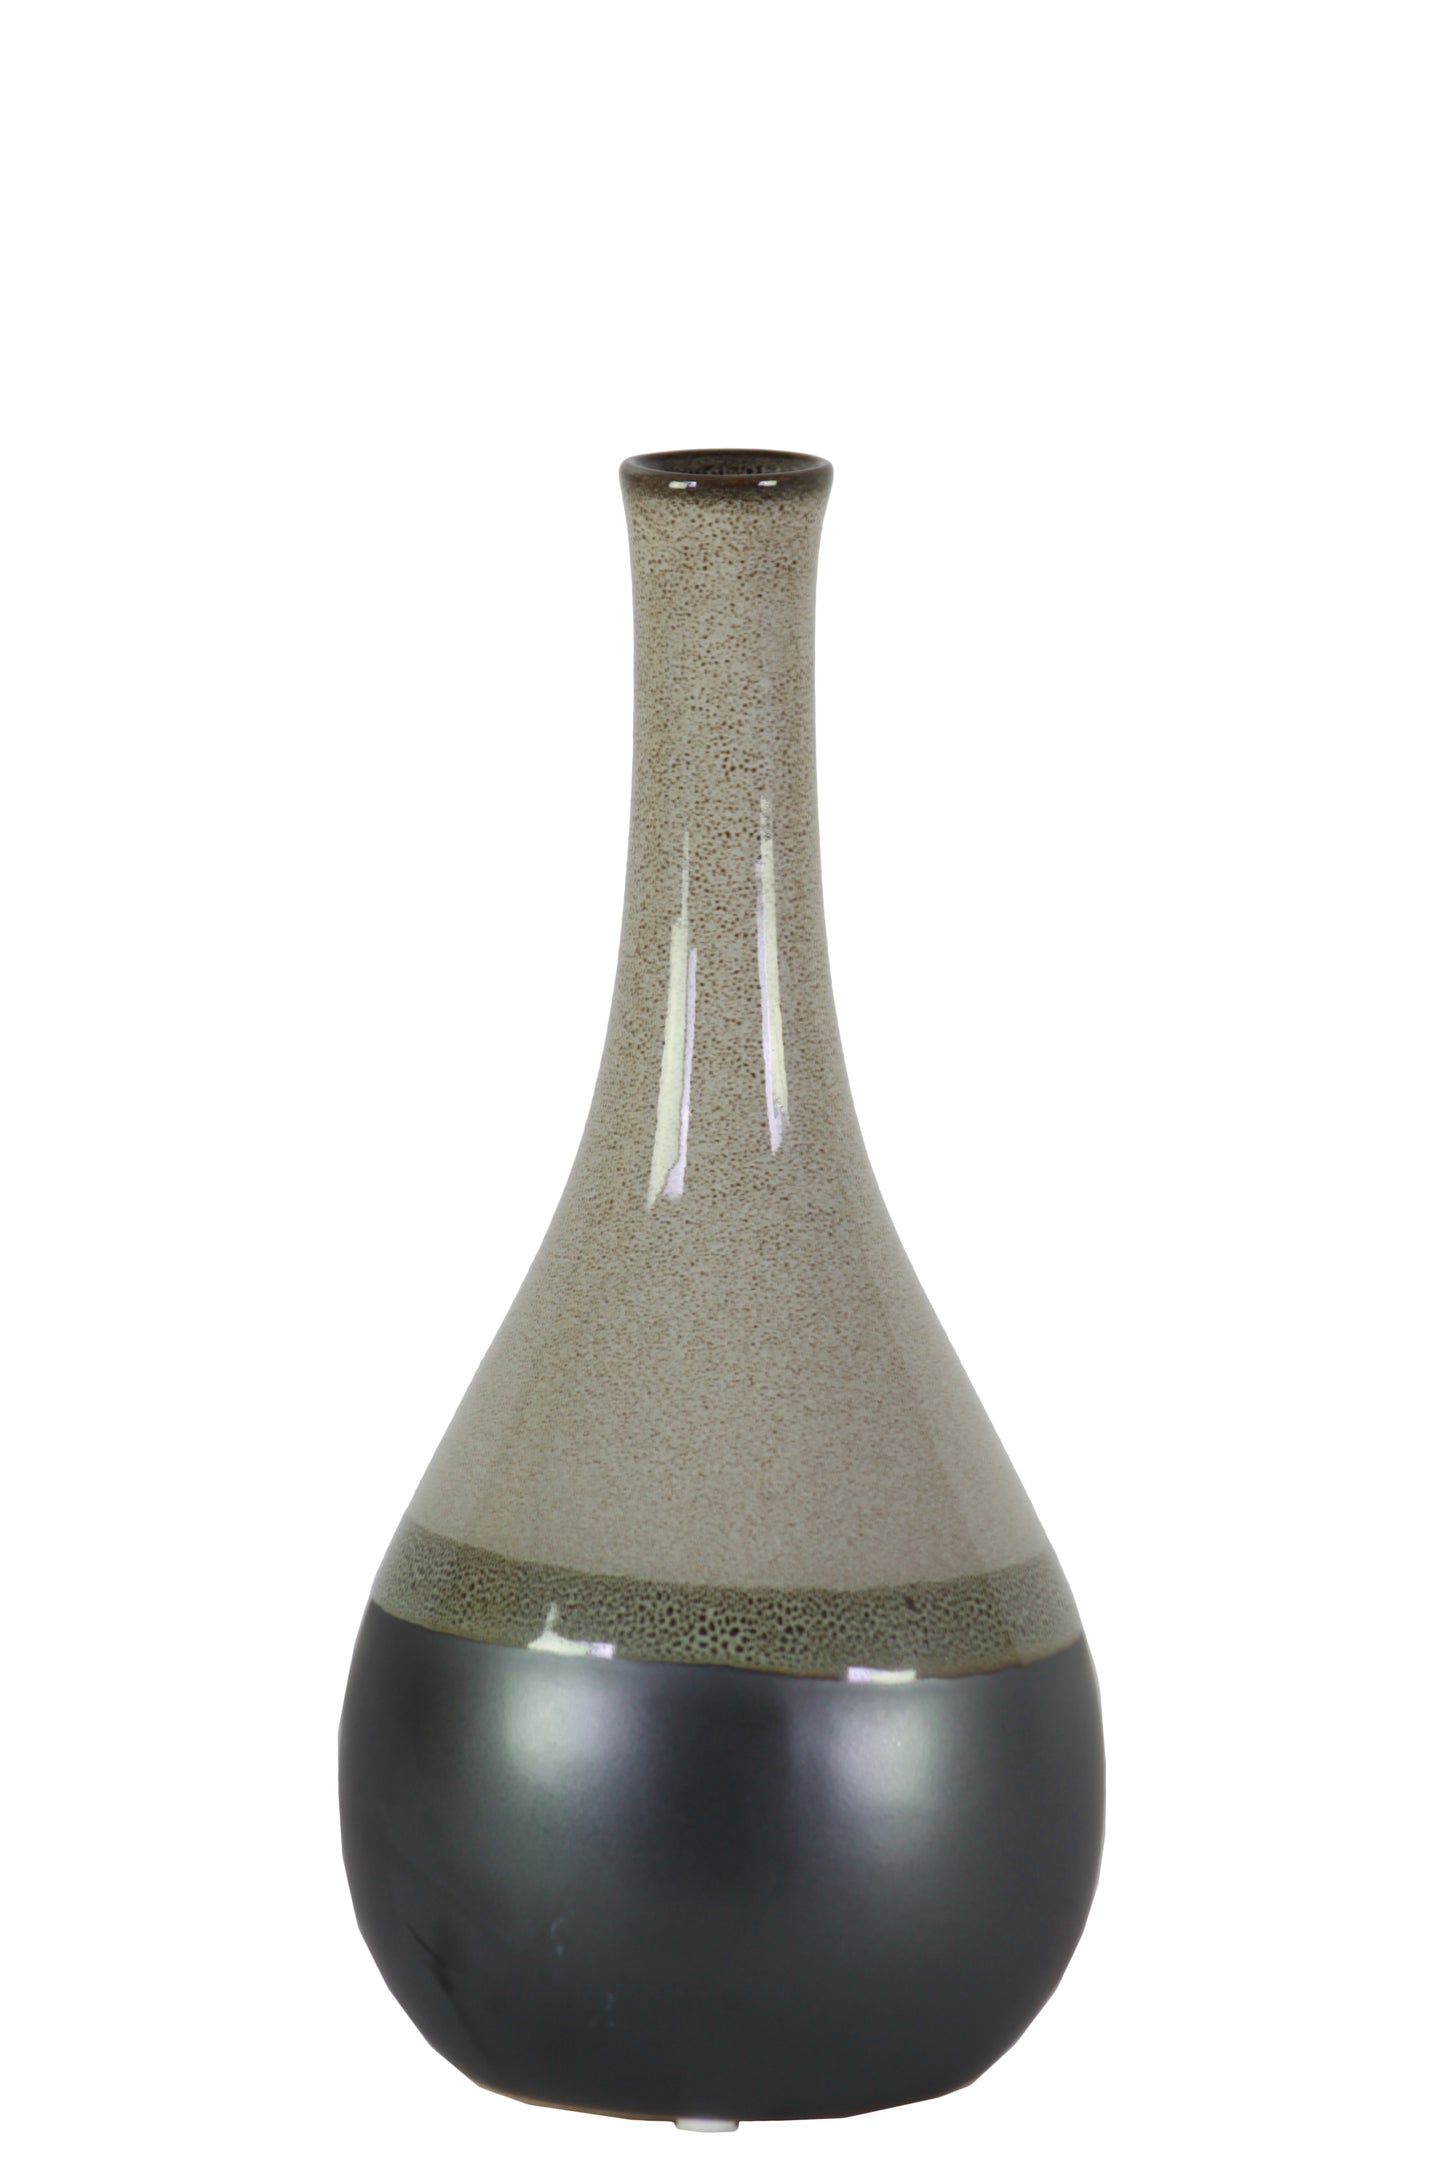 Ceramic Bellied Round Vase with Small Mouth, Long Neck and Black Banded Rim